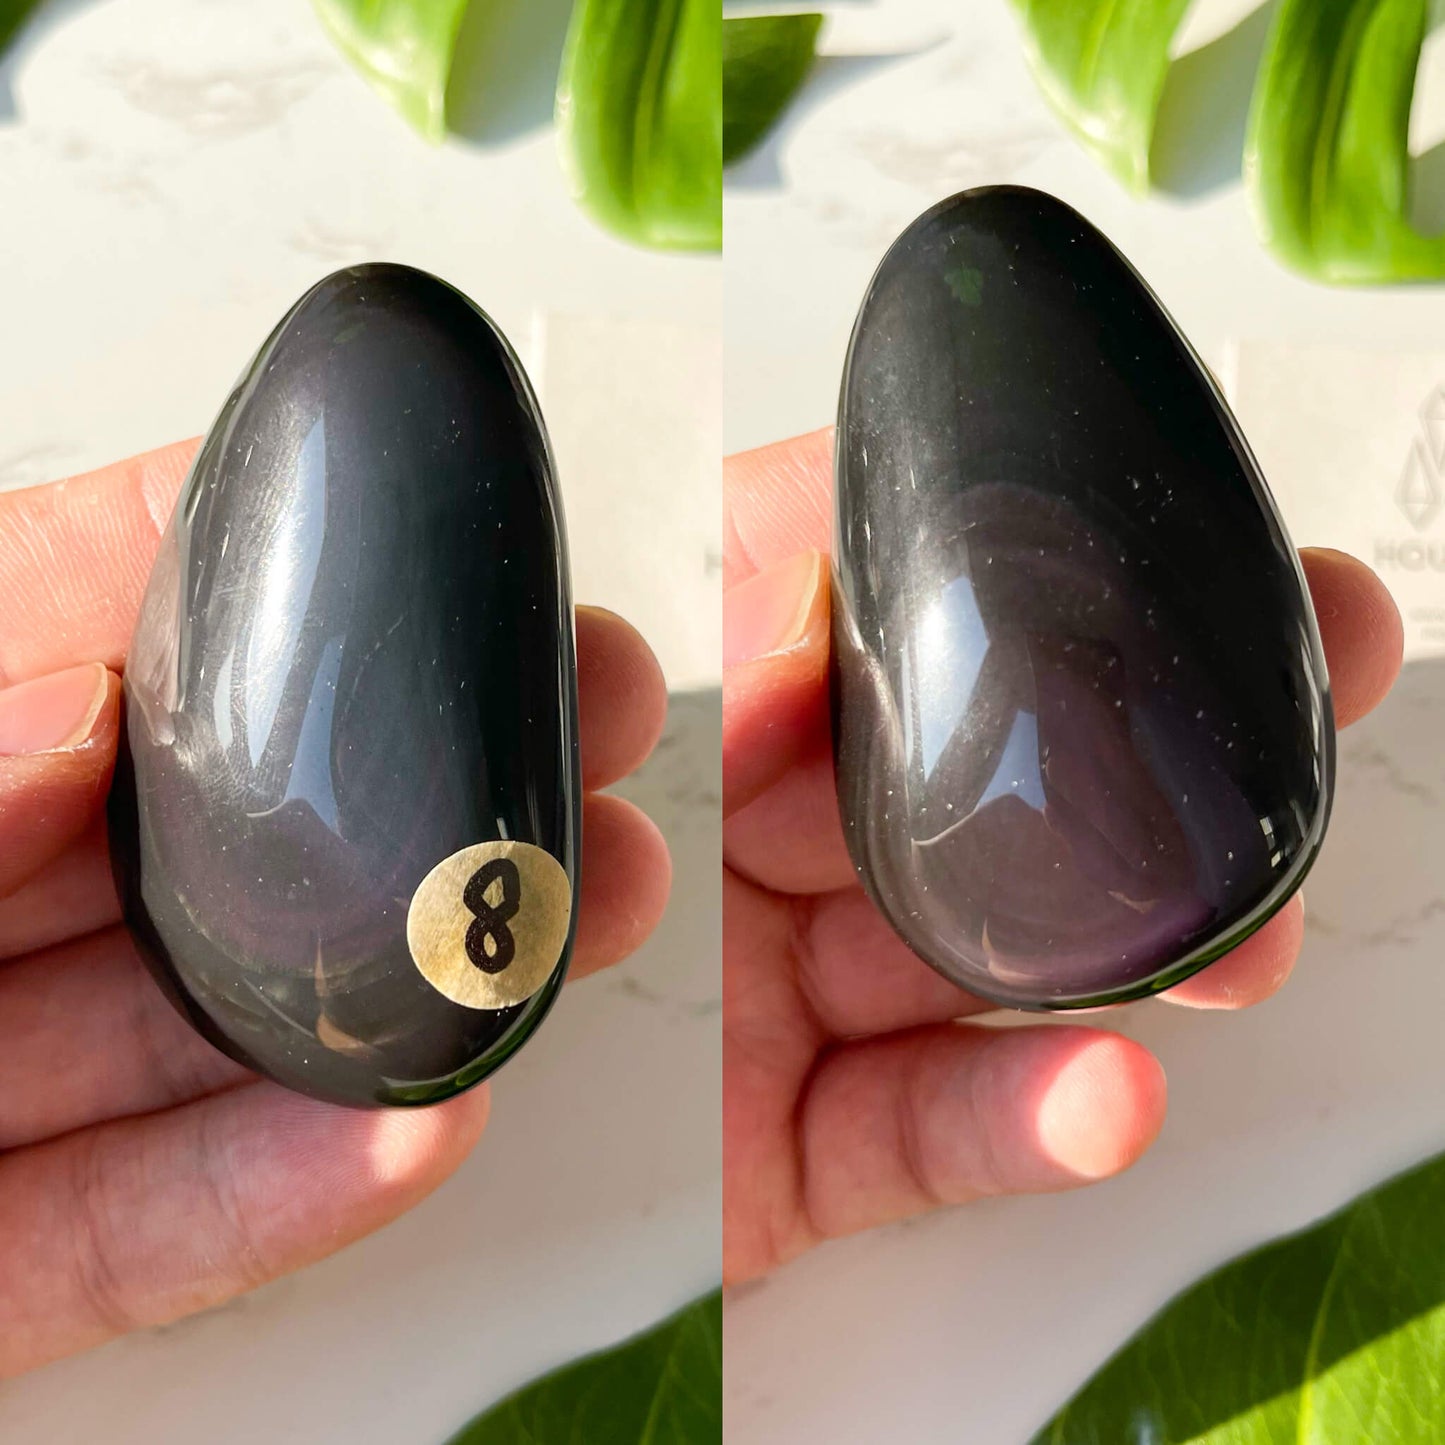 Natural Rainbow Obsidian Palm Stone/Rare Colorful Obsidian Hand Carved Pocket Stone/Large Obsidian Tumbled/Chakra Healing/AAA